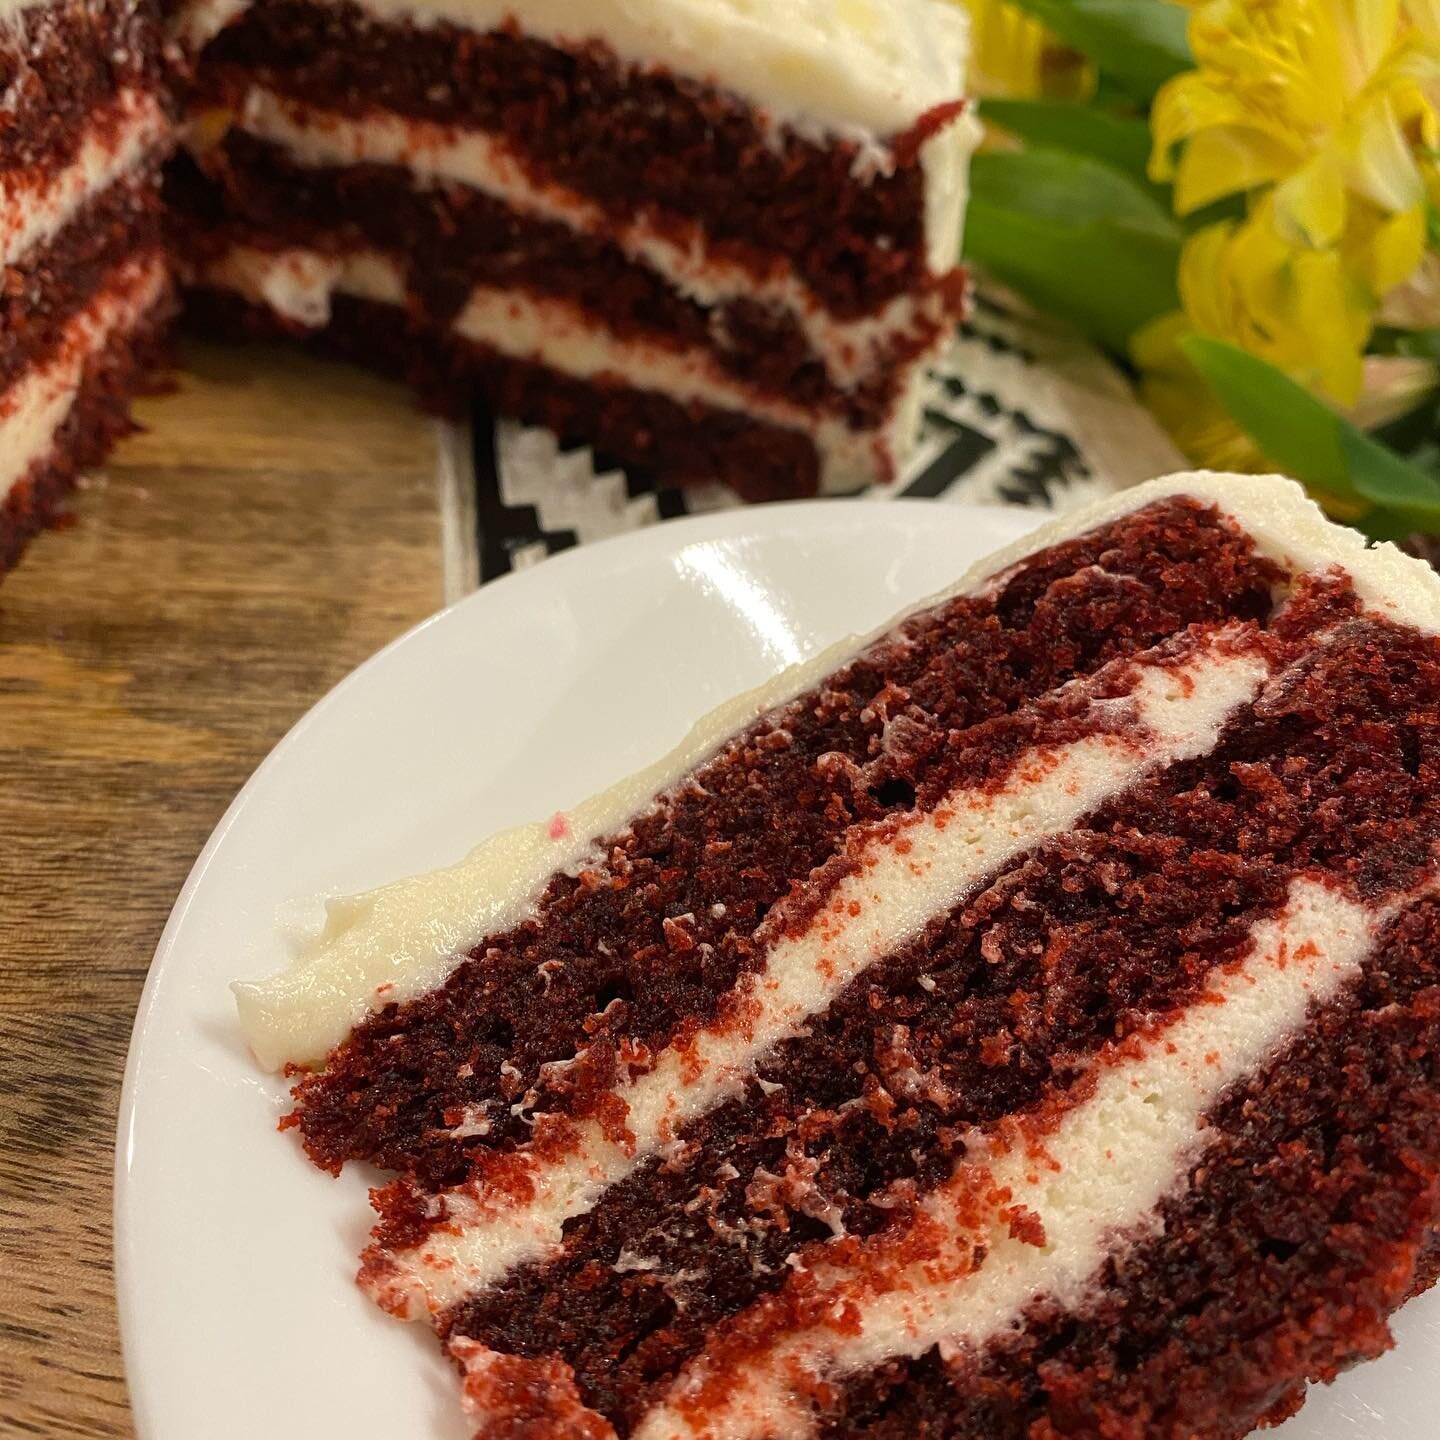 RED VELVET CAKE  Plant based version of a southern classic! ⬅️Swipe for recipe or check out the link in Bio.
.
Yield: 3 x 8-inch rounds or 2 x 9-inch rounds
.
.
.
#TasteTutor #Chef #Catering #Food #Cooking #QuarantineEats #Culinary #Cuisine #Recipe #